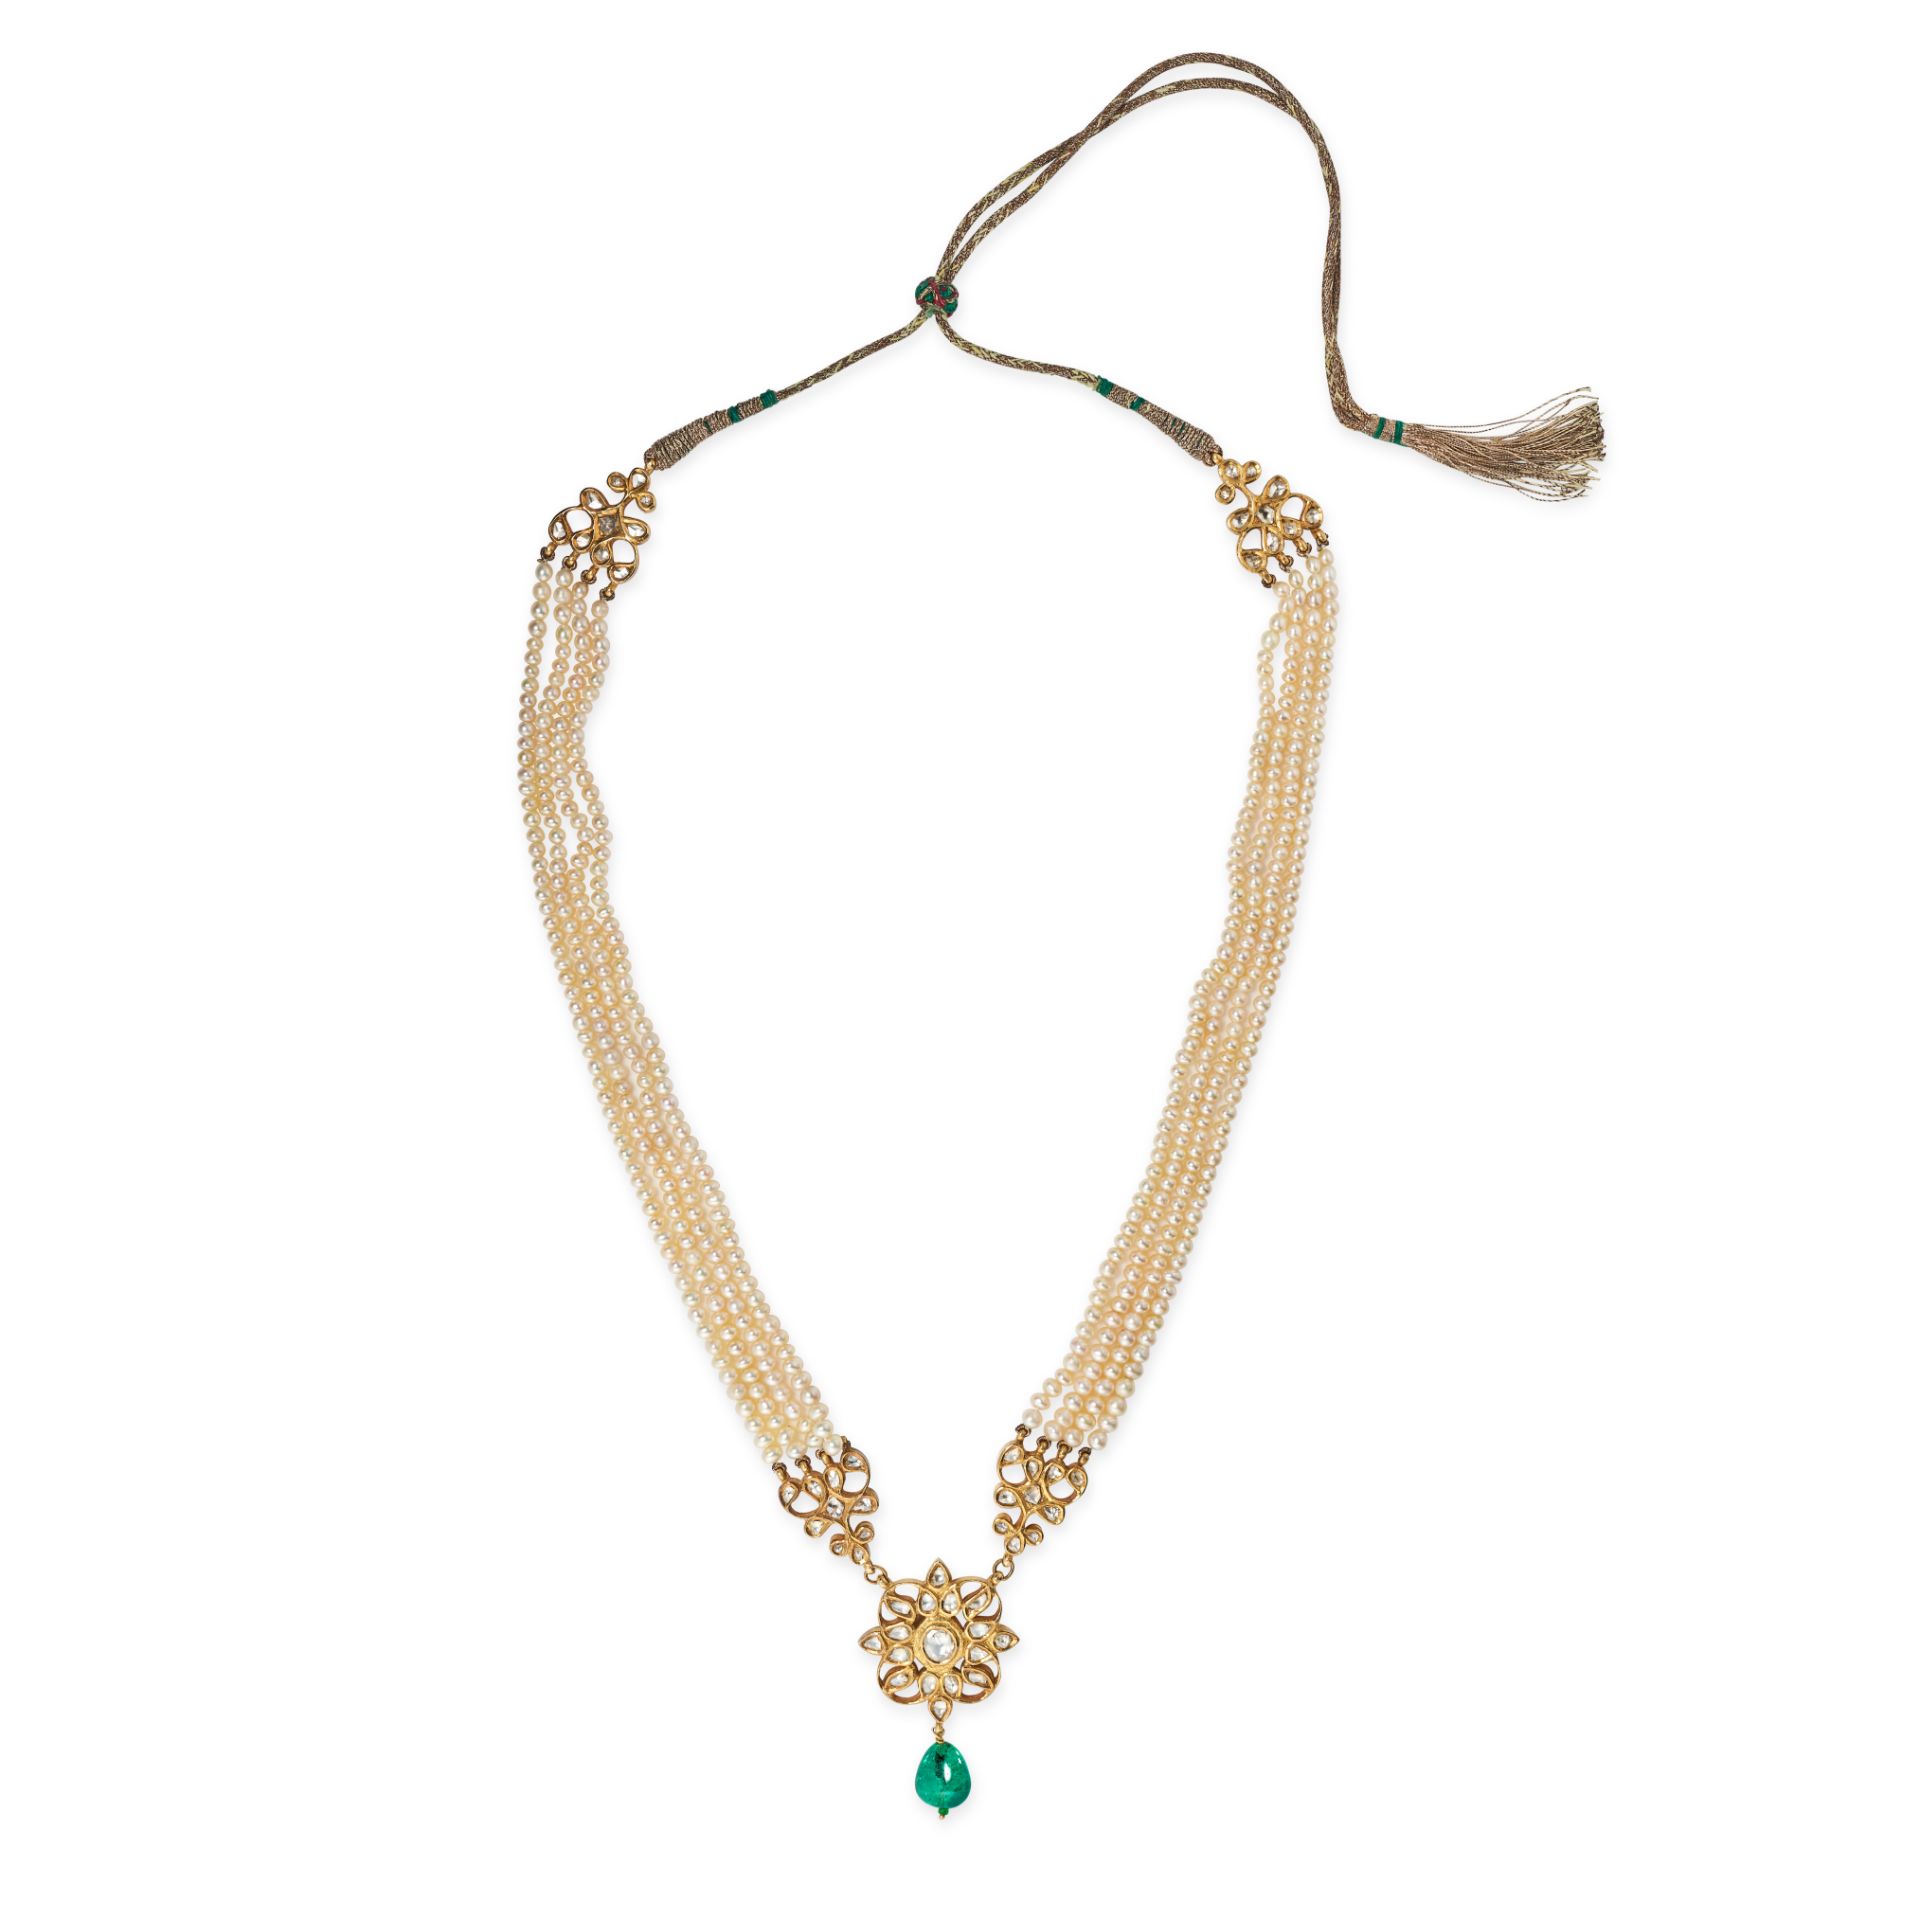 NO RESERVE - AN INDIAN DIAMOND, PEARL AND EMERALD NECKLACE in high carat yellow gold, comprising ... - Image 2 of 2